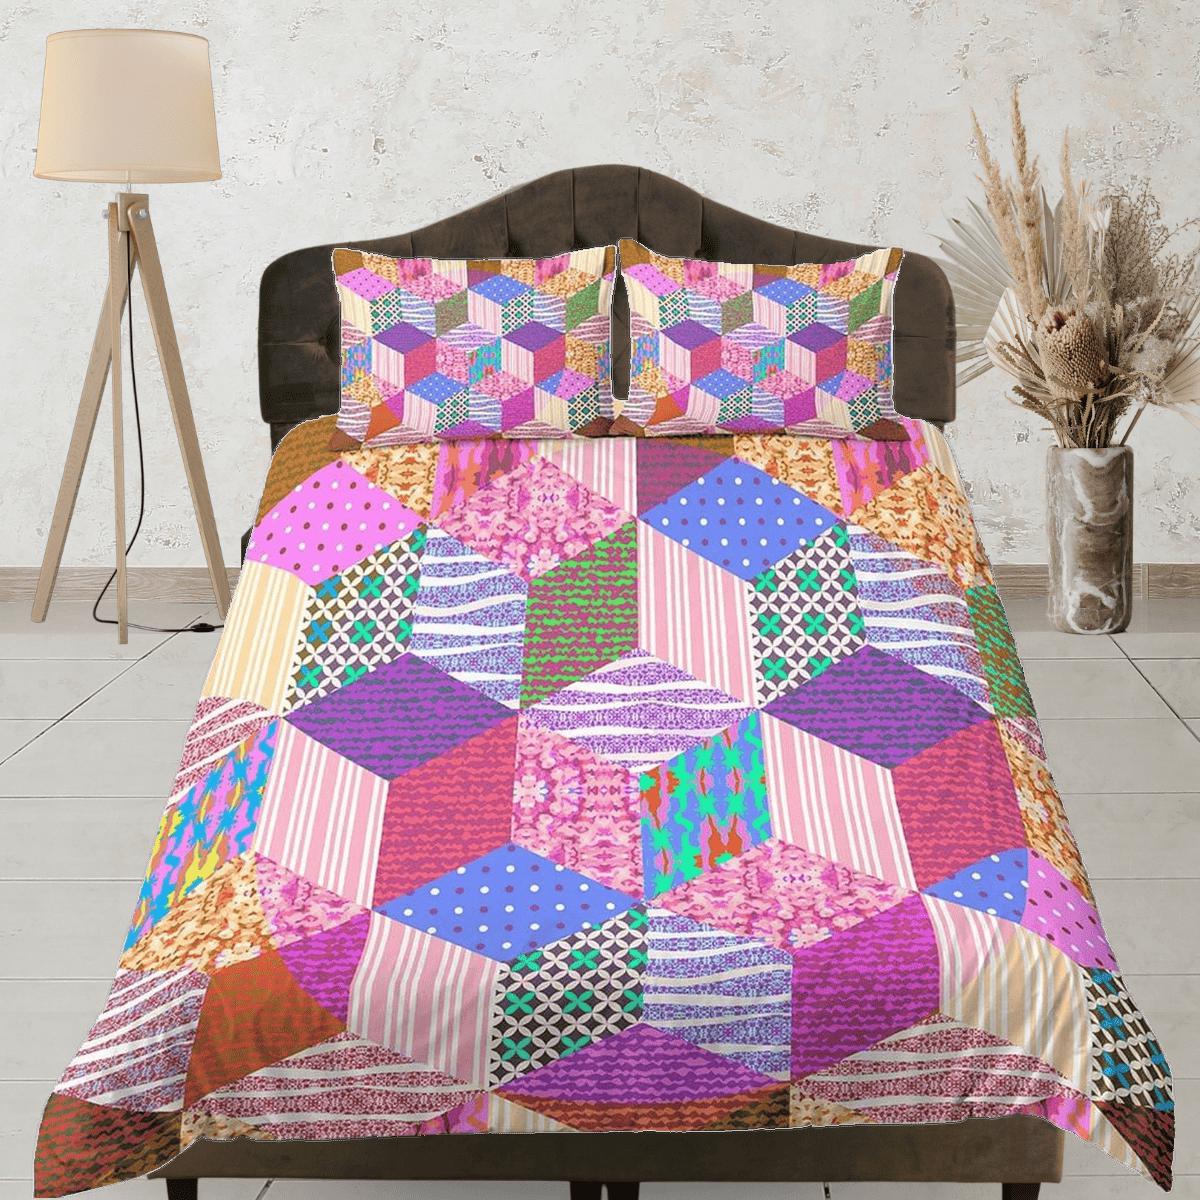 daintyduvet Bright pink patchwork quilt printed duvet cover set, aesthetic room decor bedding set full, king, queen size, boho bedspread shabby chic